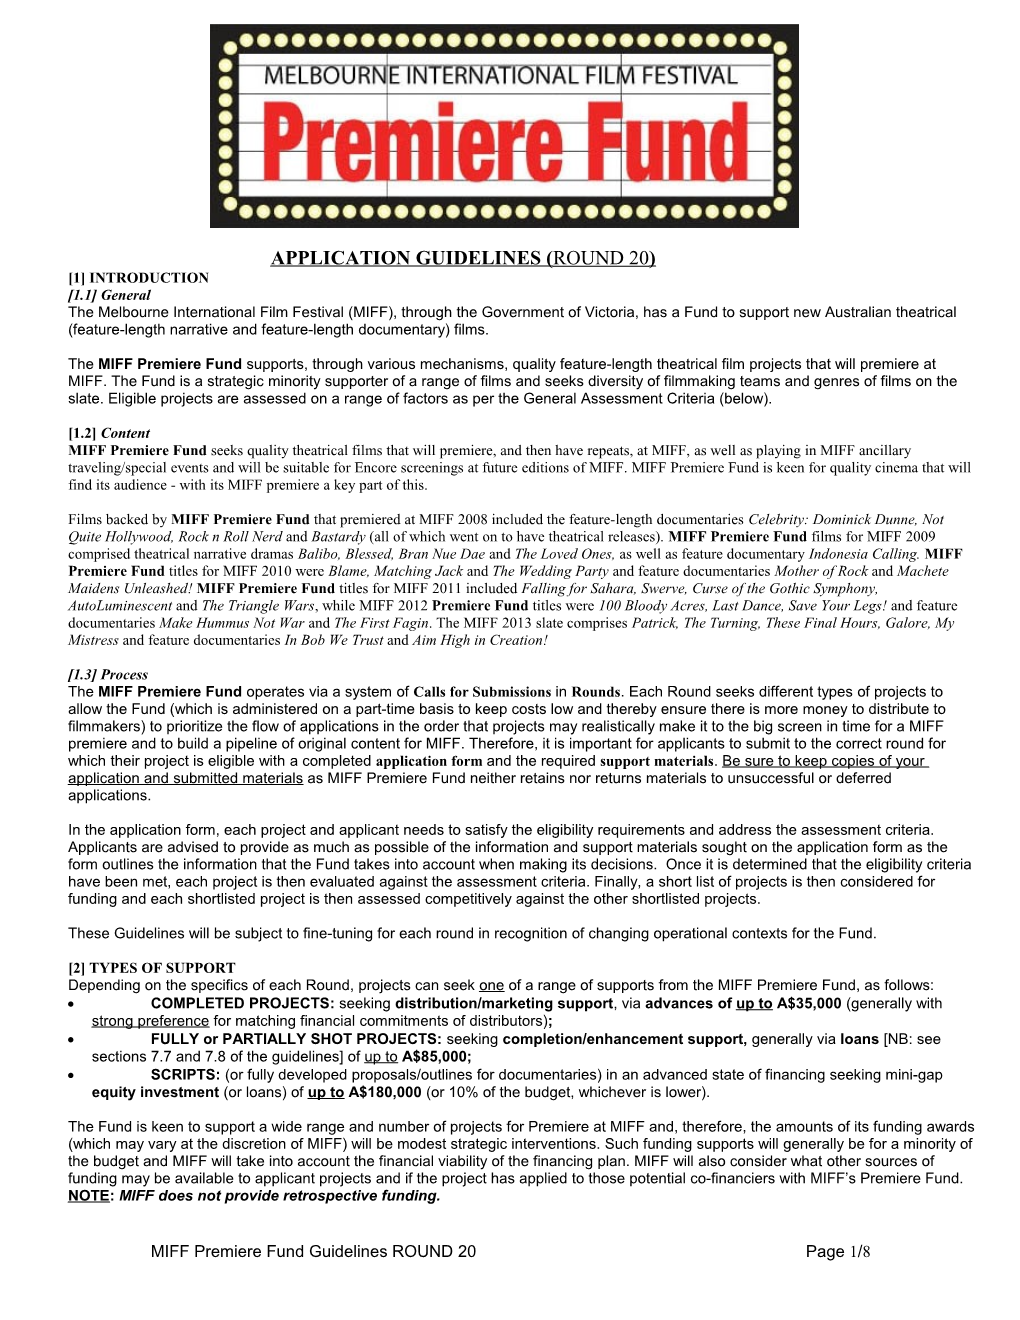 MIFF Premiere Fund Guidelines Page 1/8